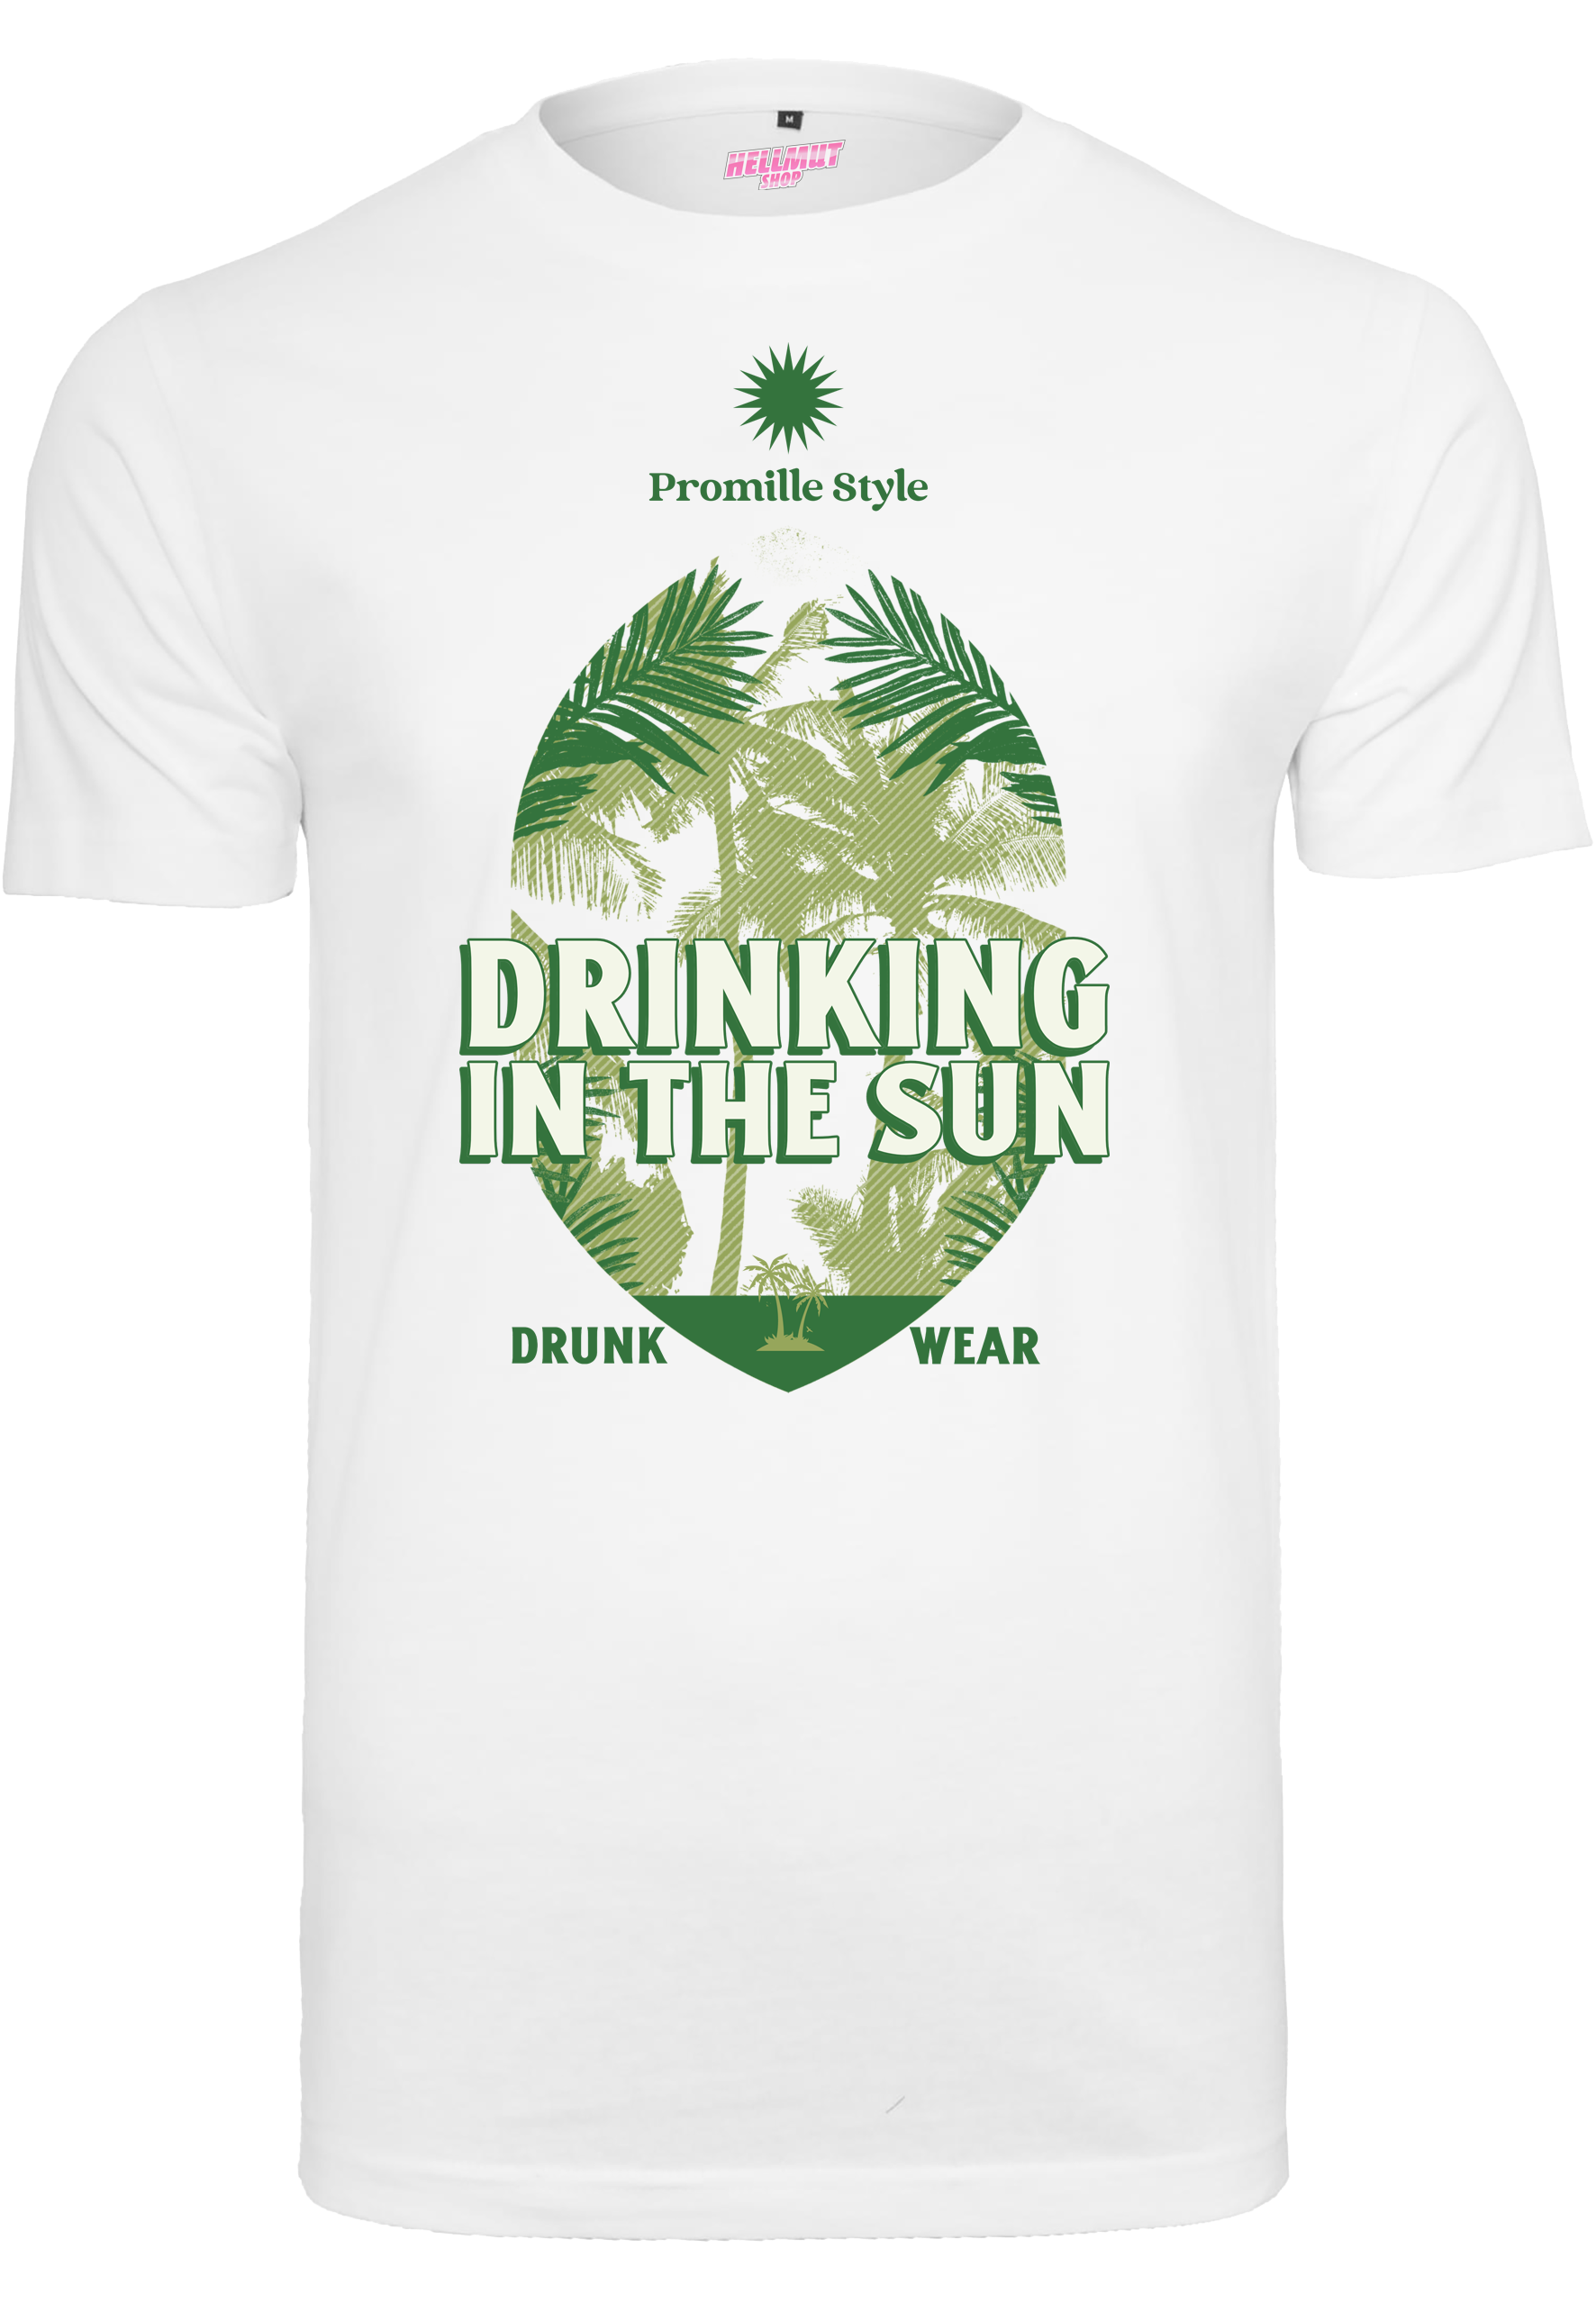 Promille Style - Drinking in the Sun Shirt [white]